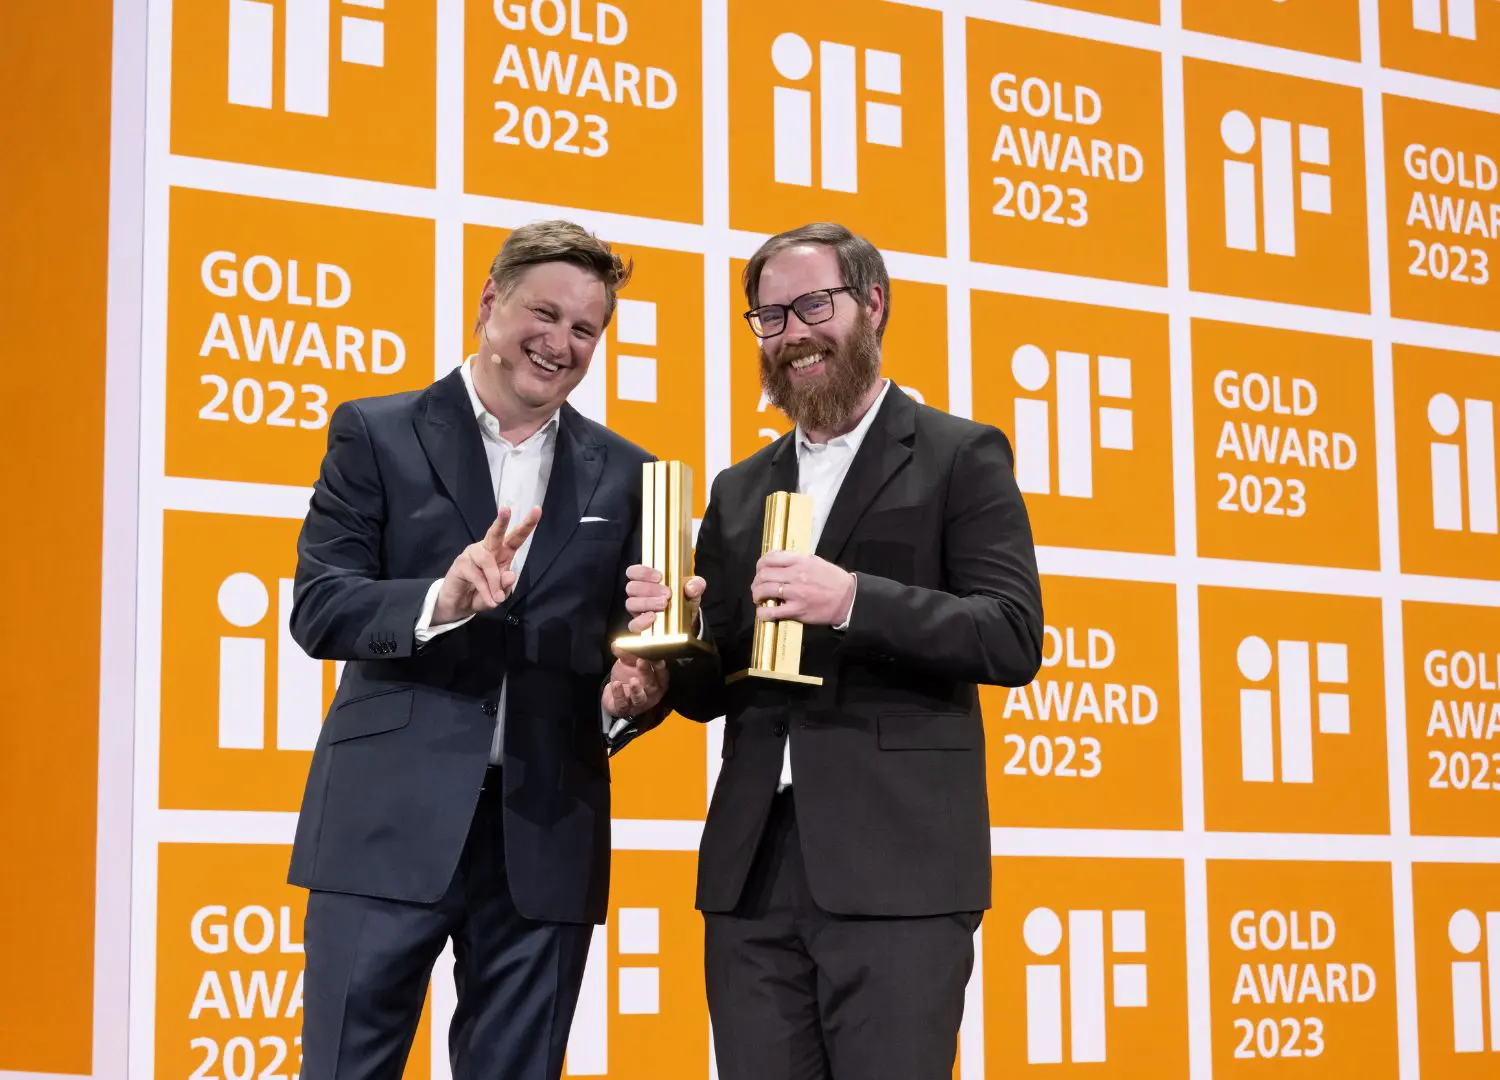 The role and responsibilities of a design award - interview with Uwe Cremering, CEO of iF Design